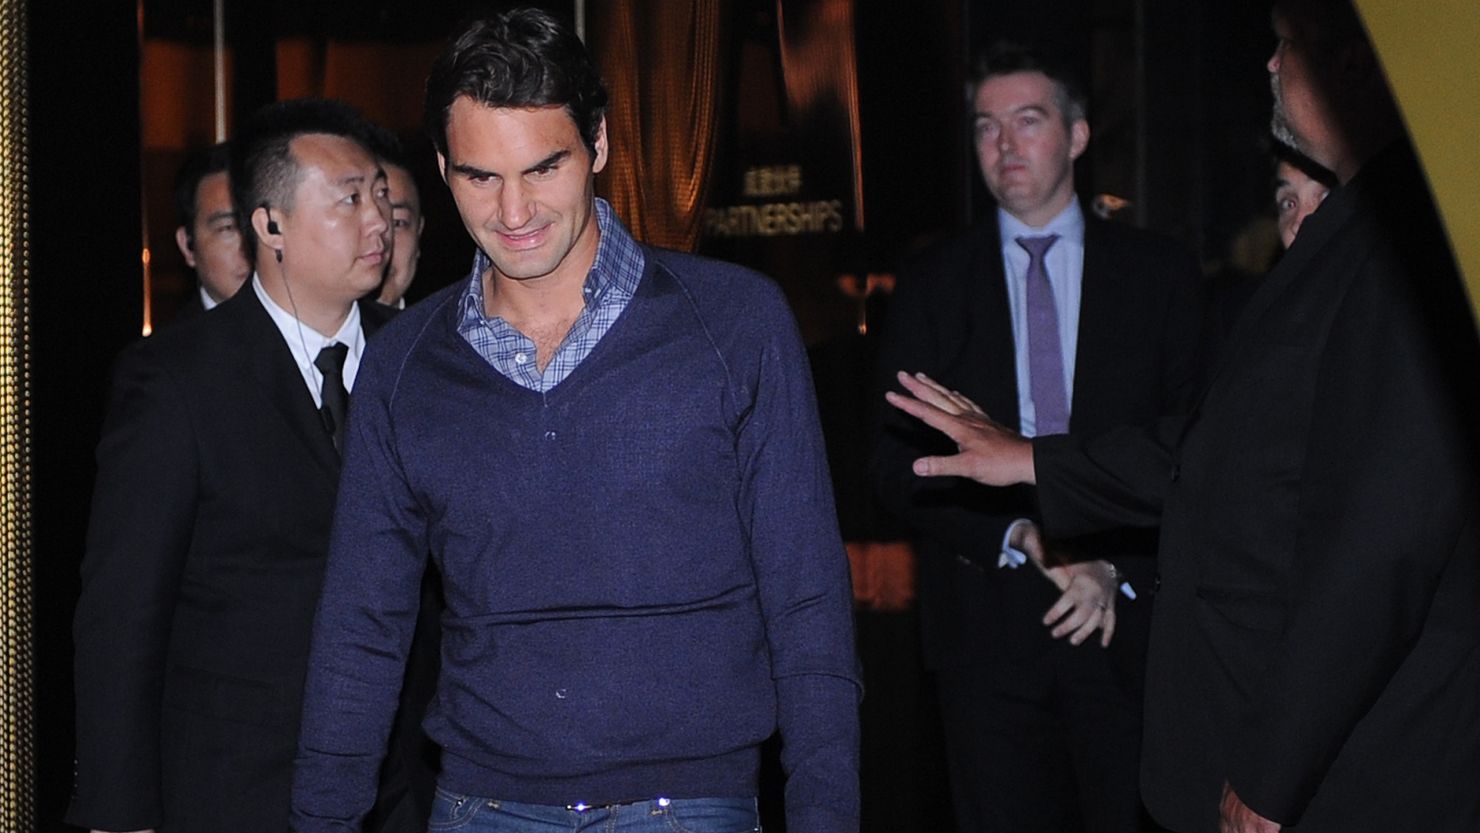 Roger Federer is flanked by security guard as he arrives for the ceremonial draw for the Shanghai Masters in China.